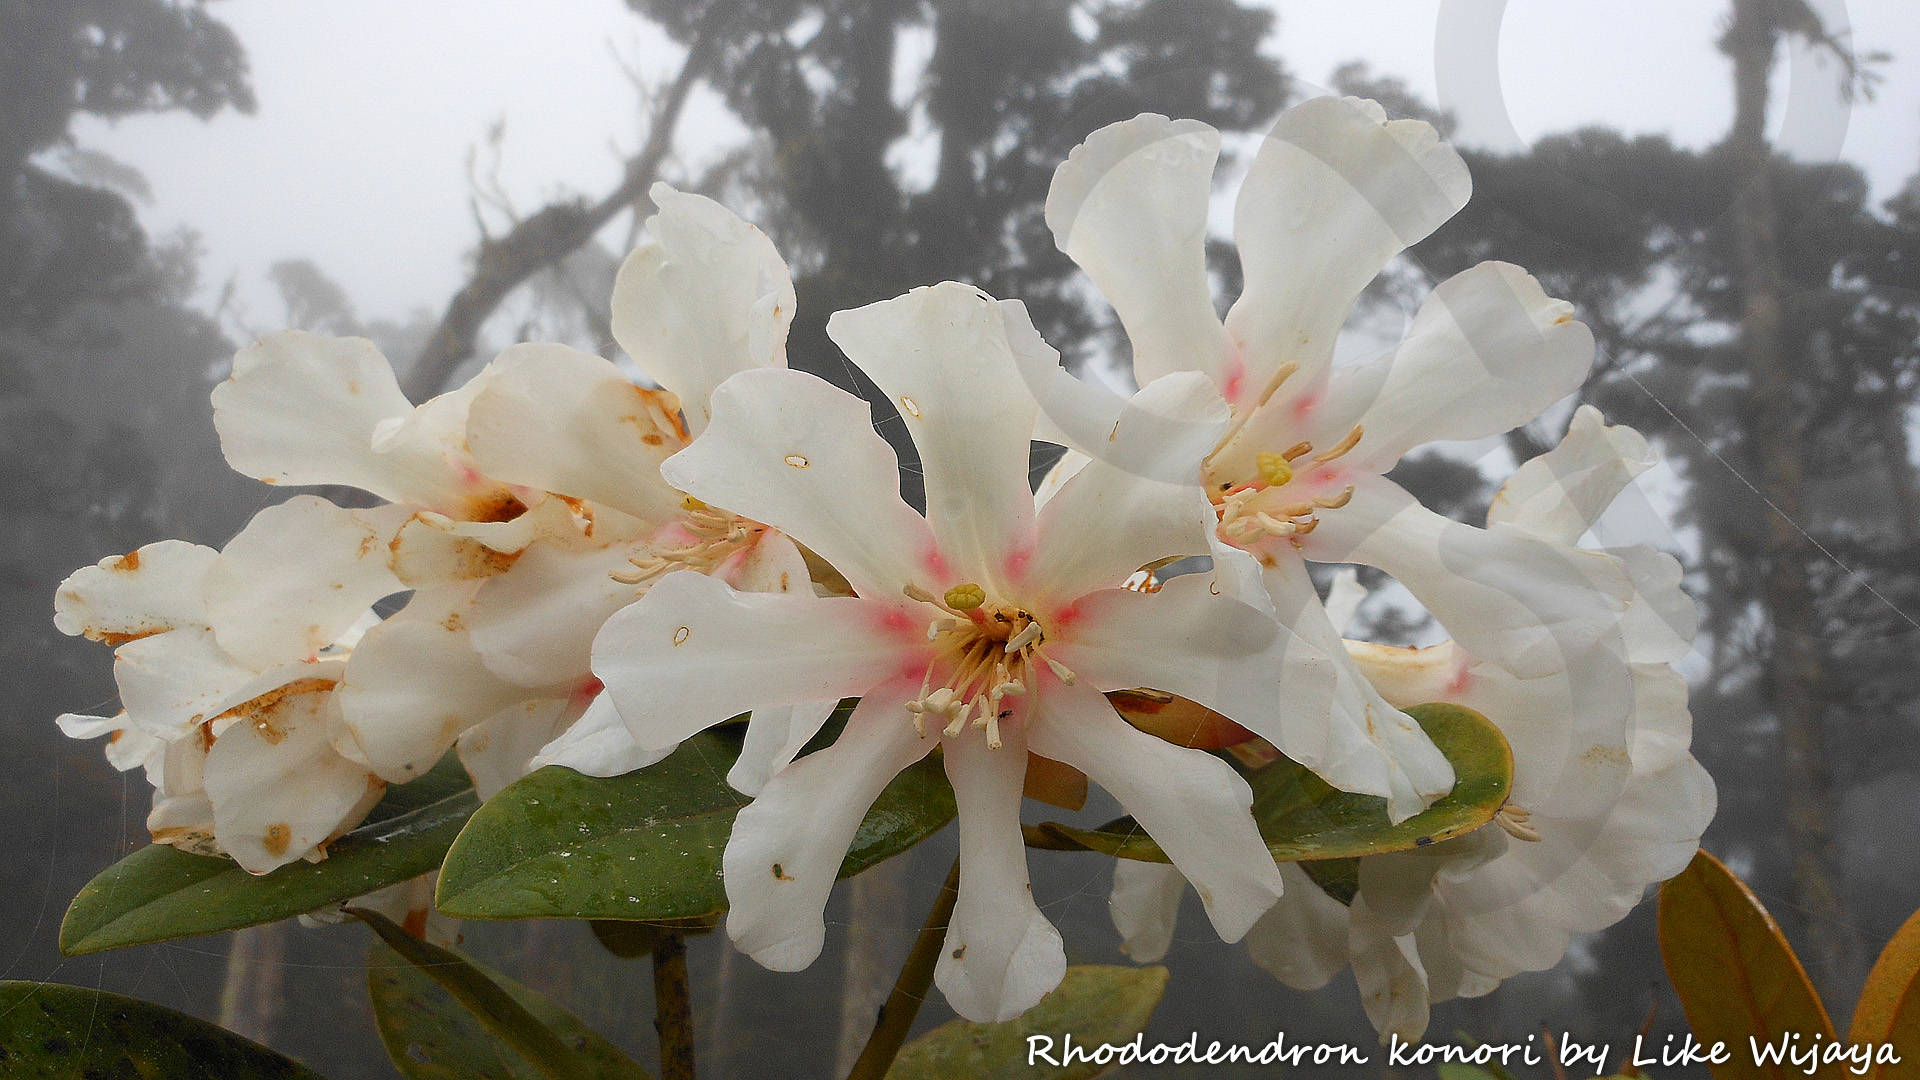 The shrub Rhododendron konori is a conspicuous feature of anthropogenic forest clearings above 1,600 m elevation in the Arfak Mountains on New Guinea's Bird's Head or Vogelkop Peninsula. Copyright © Like Wijaya